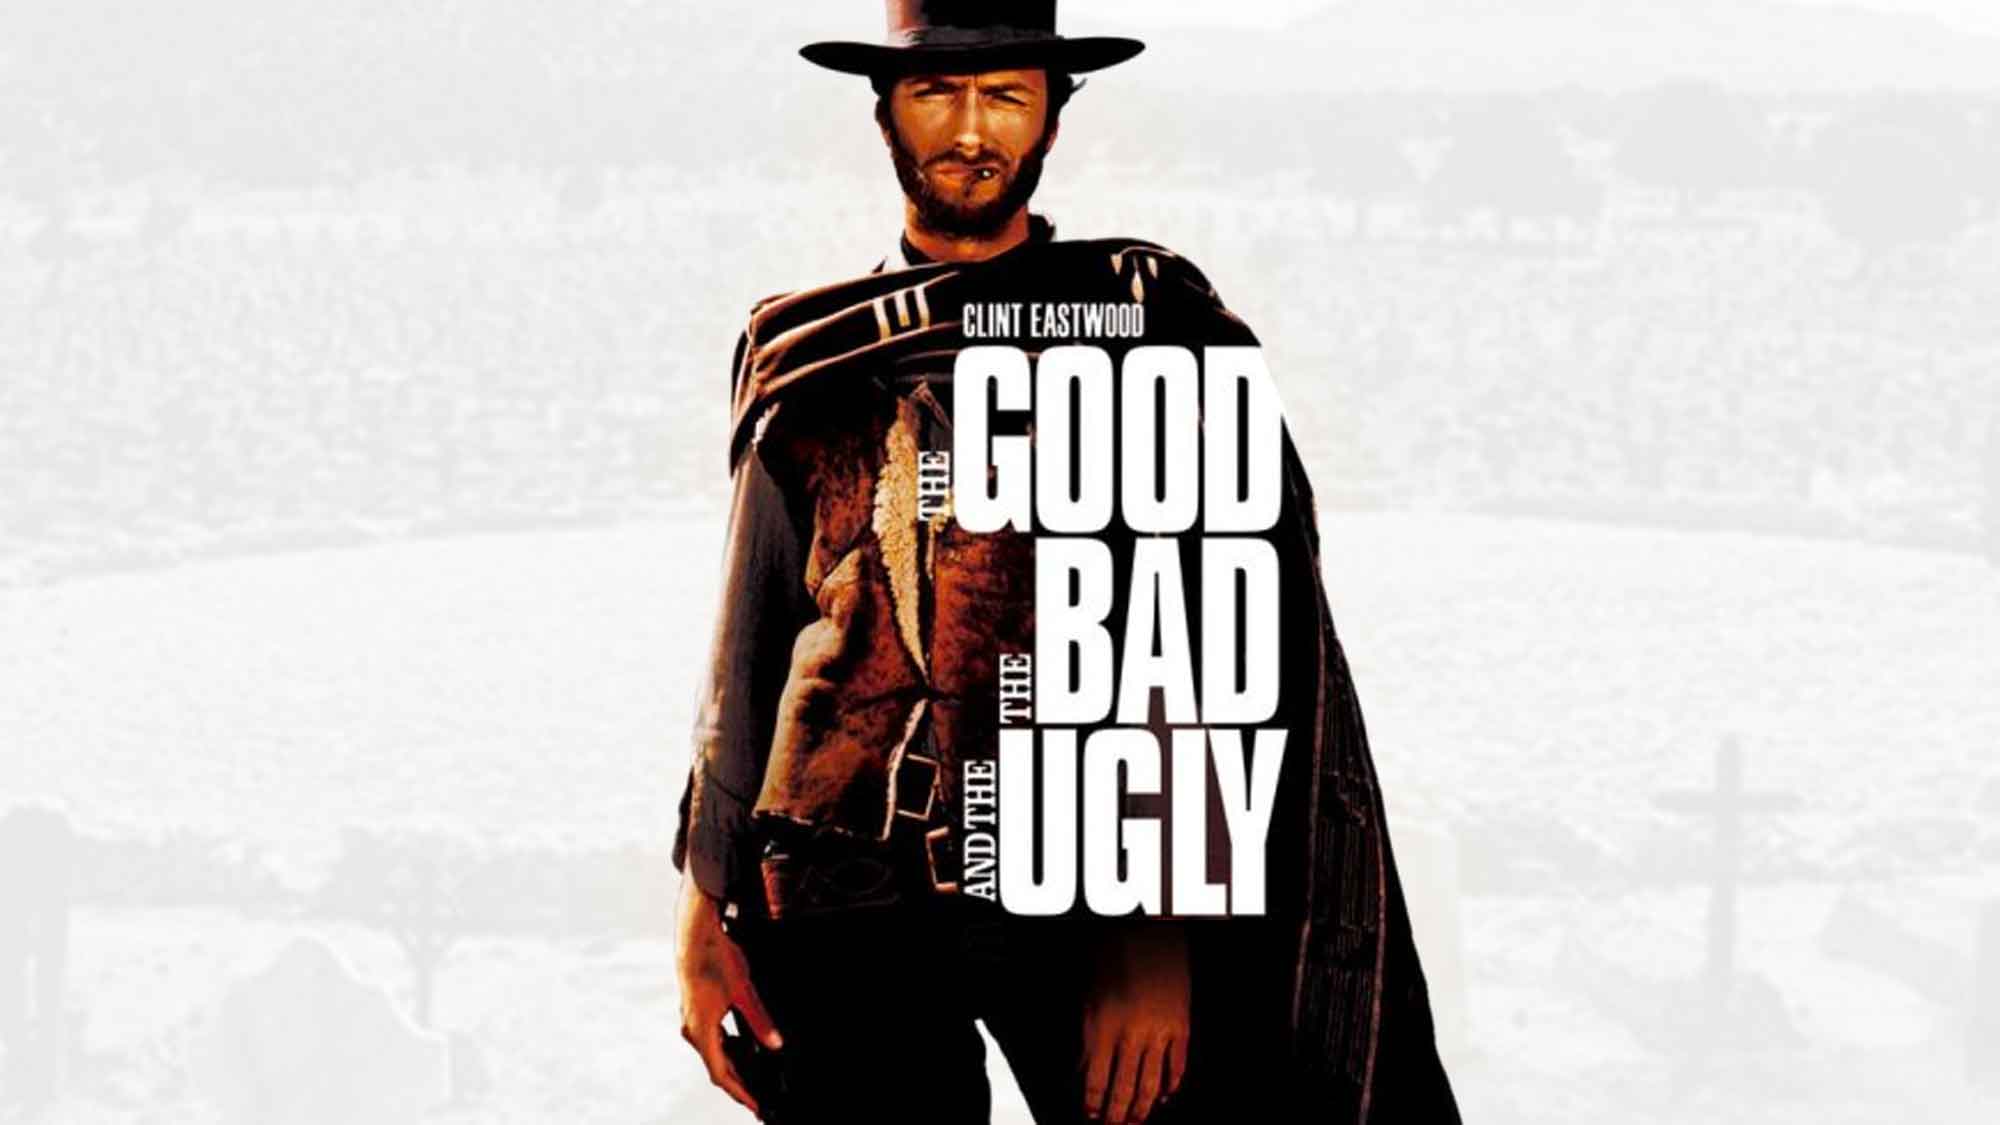 Quote Of The Day: "There are two kinds of people..." From 'The Good, The Bad, And The Ugly'